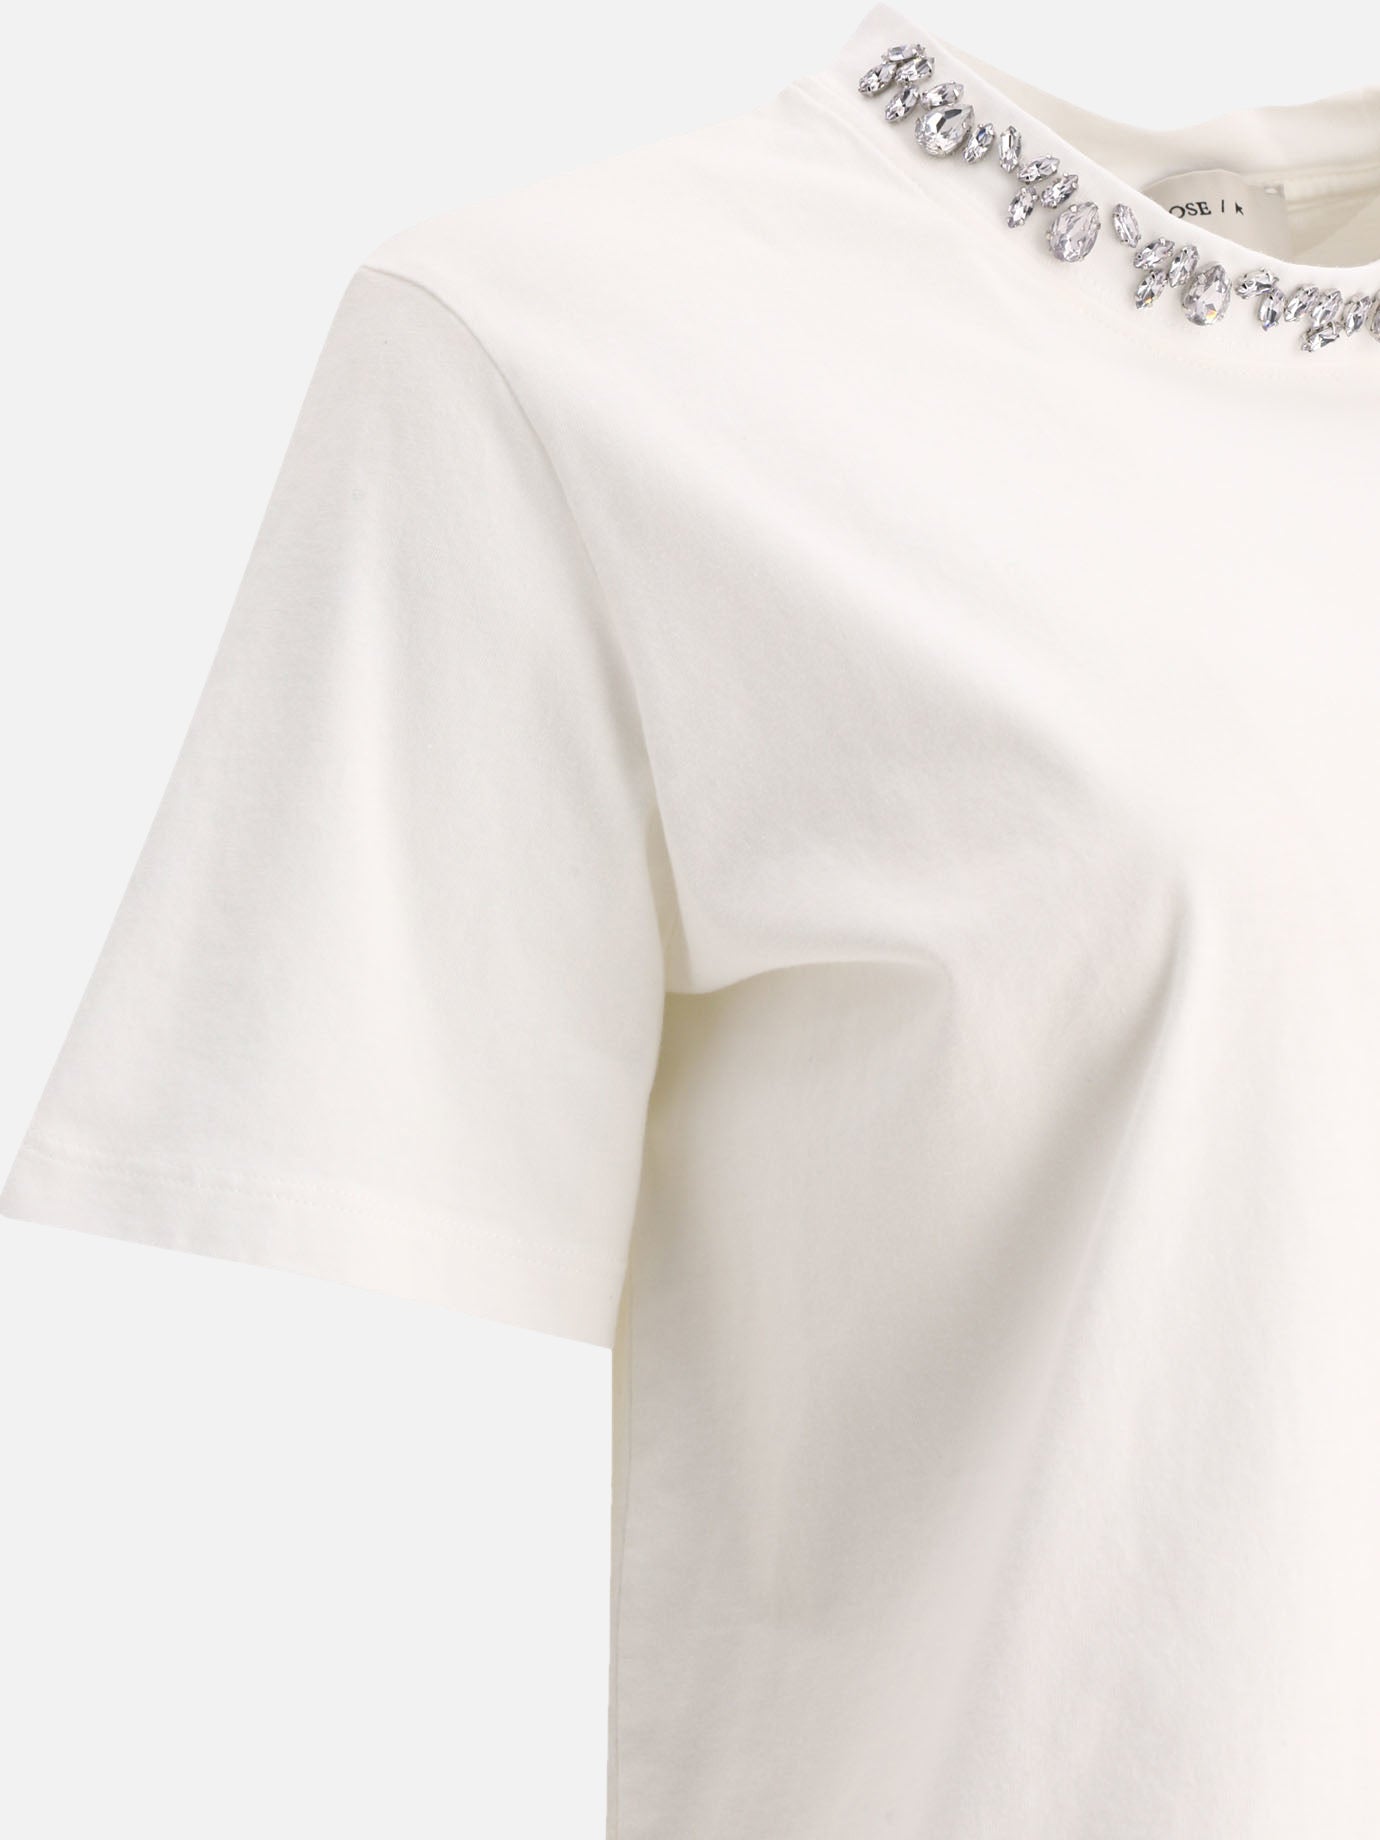 T-shirt with crystal embellishments